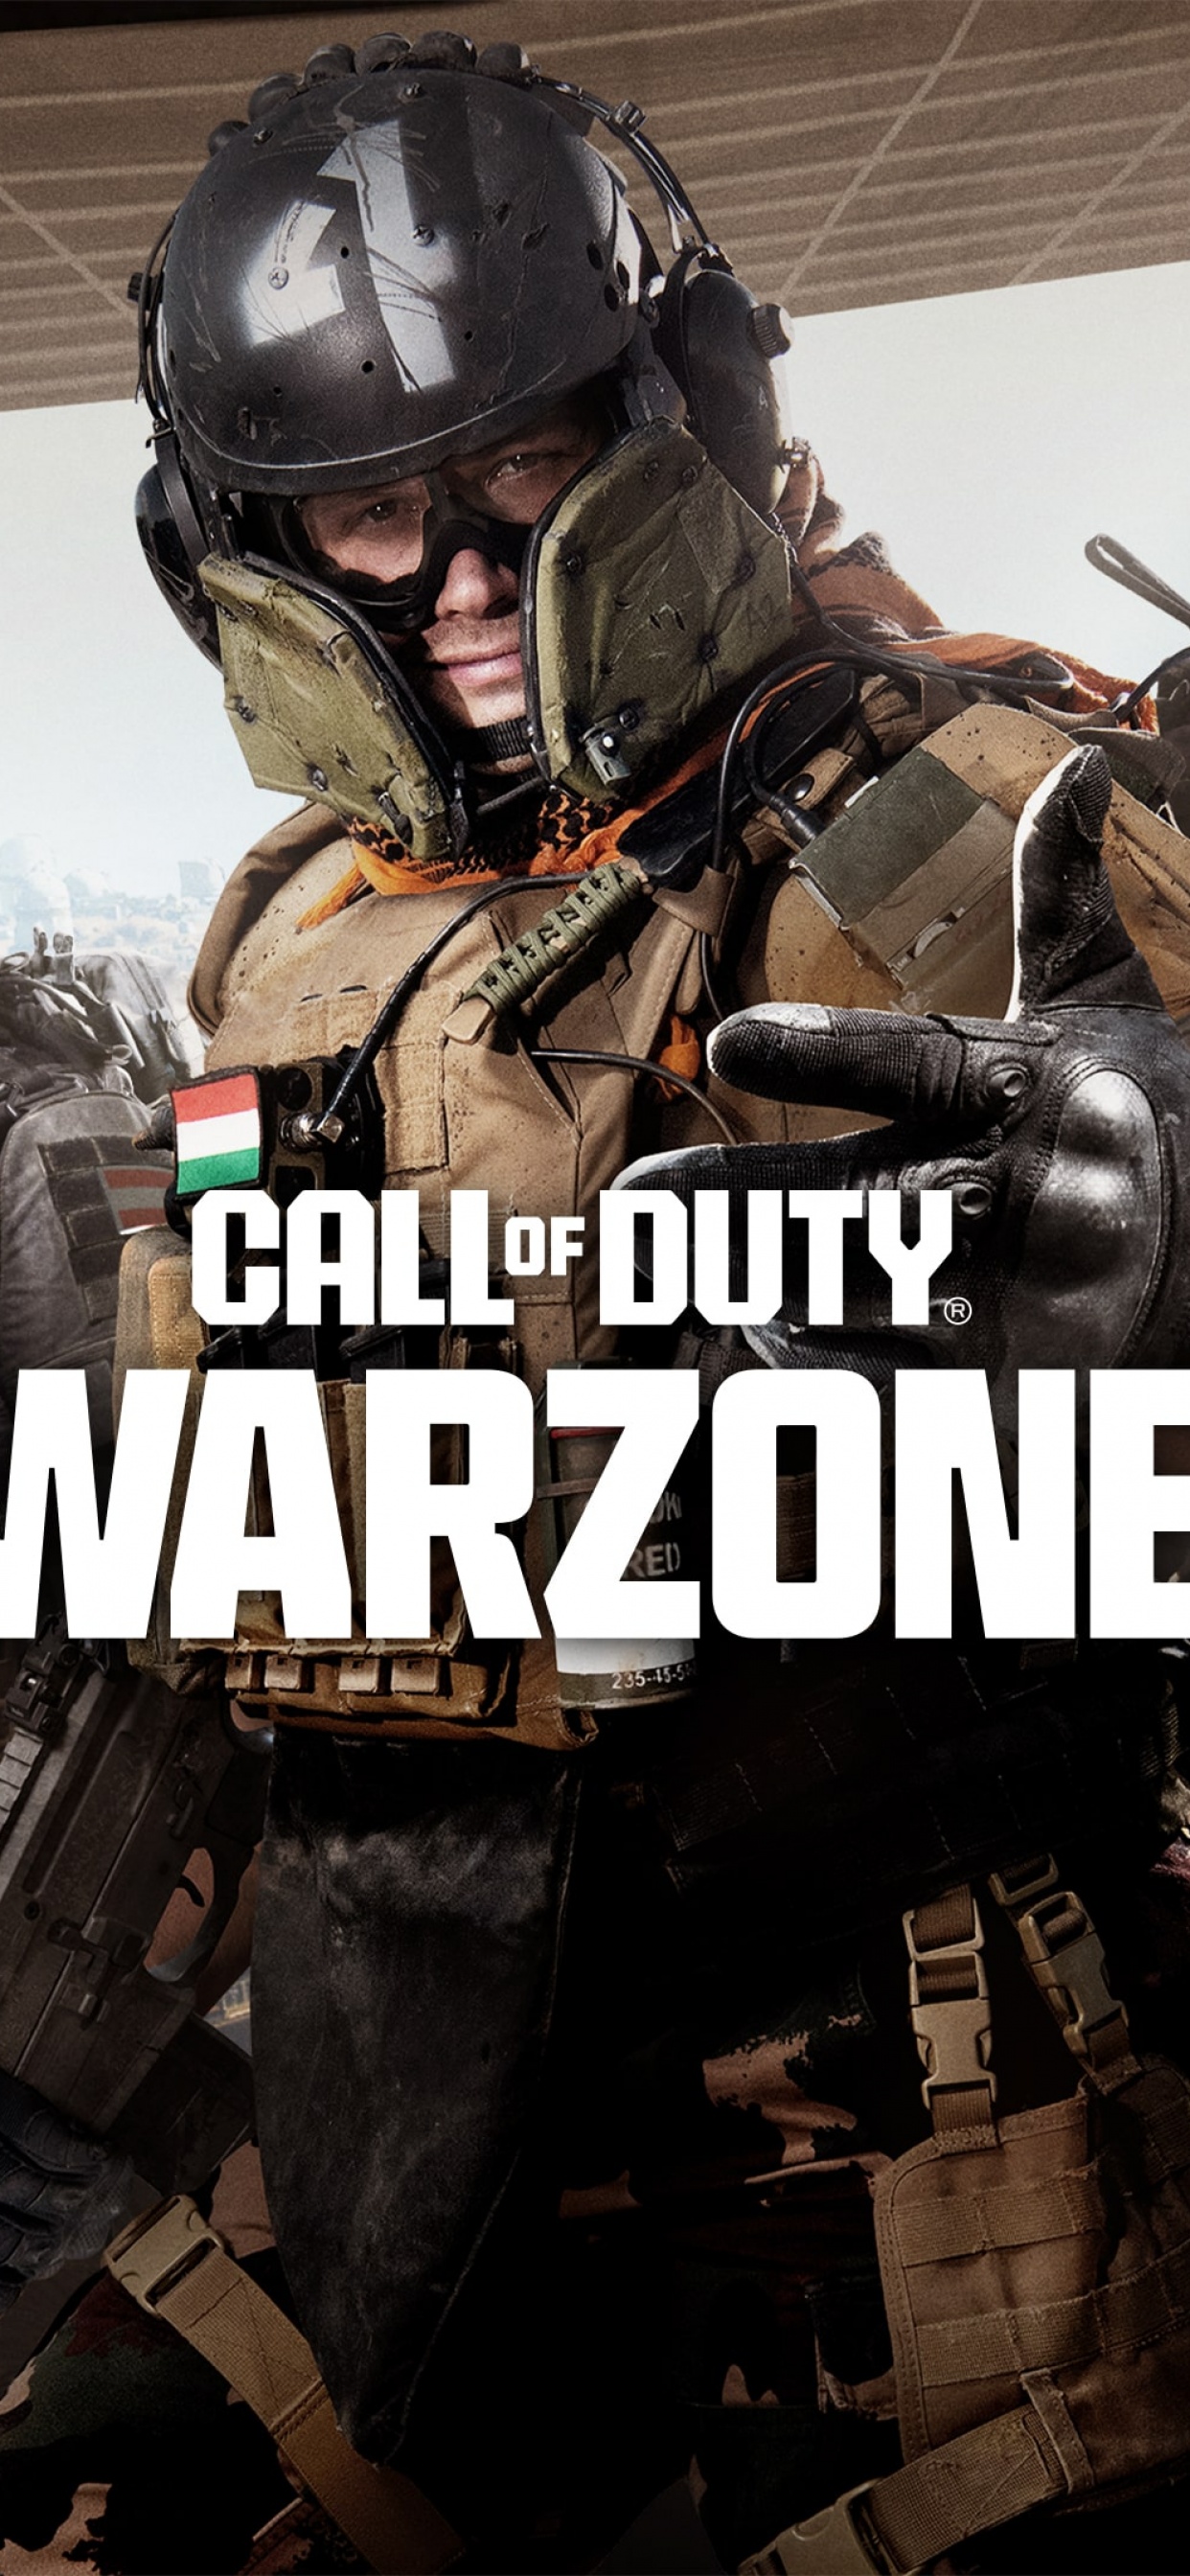 Call of Duty Warzone 2 Wallpaper 4K, Online games